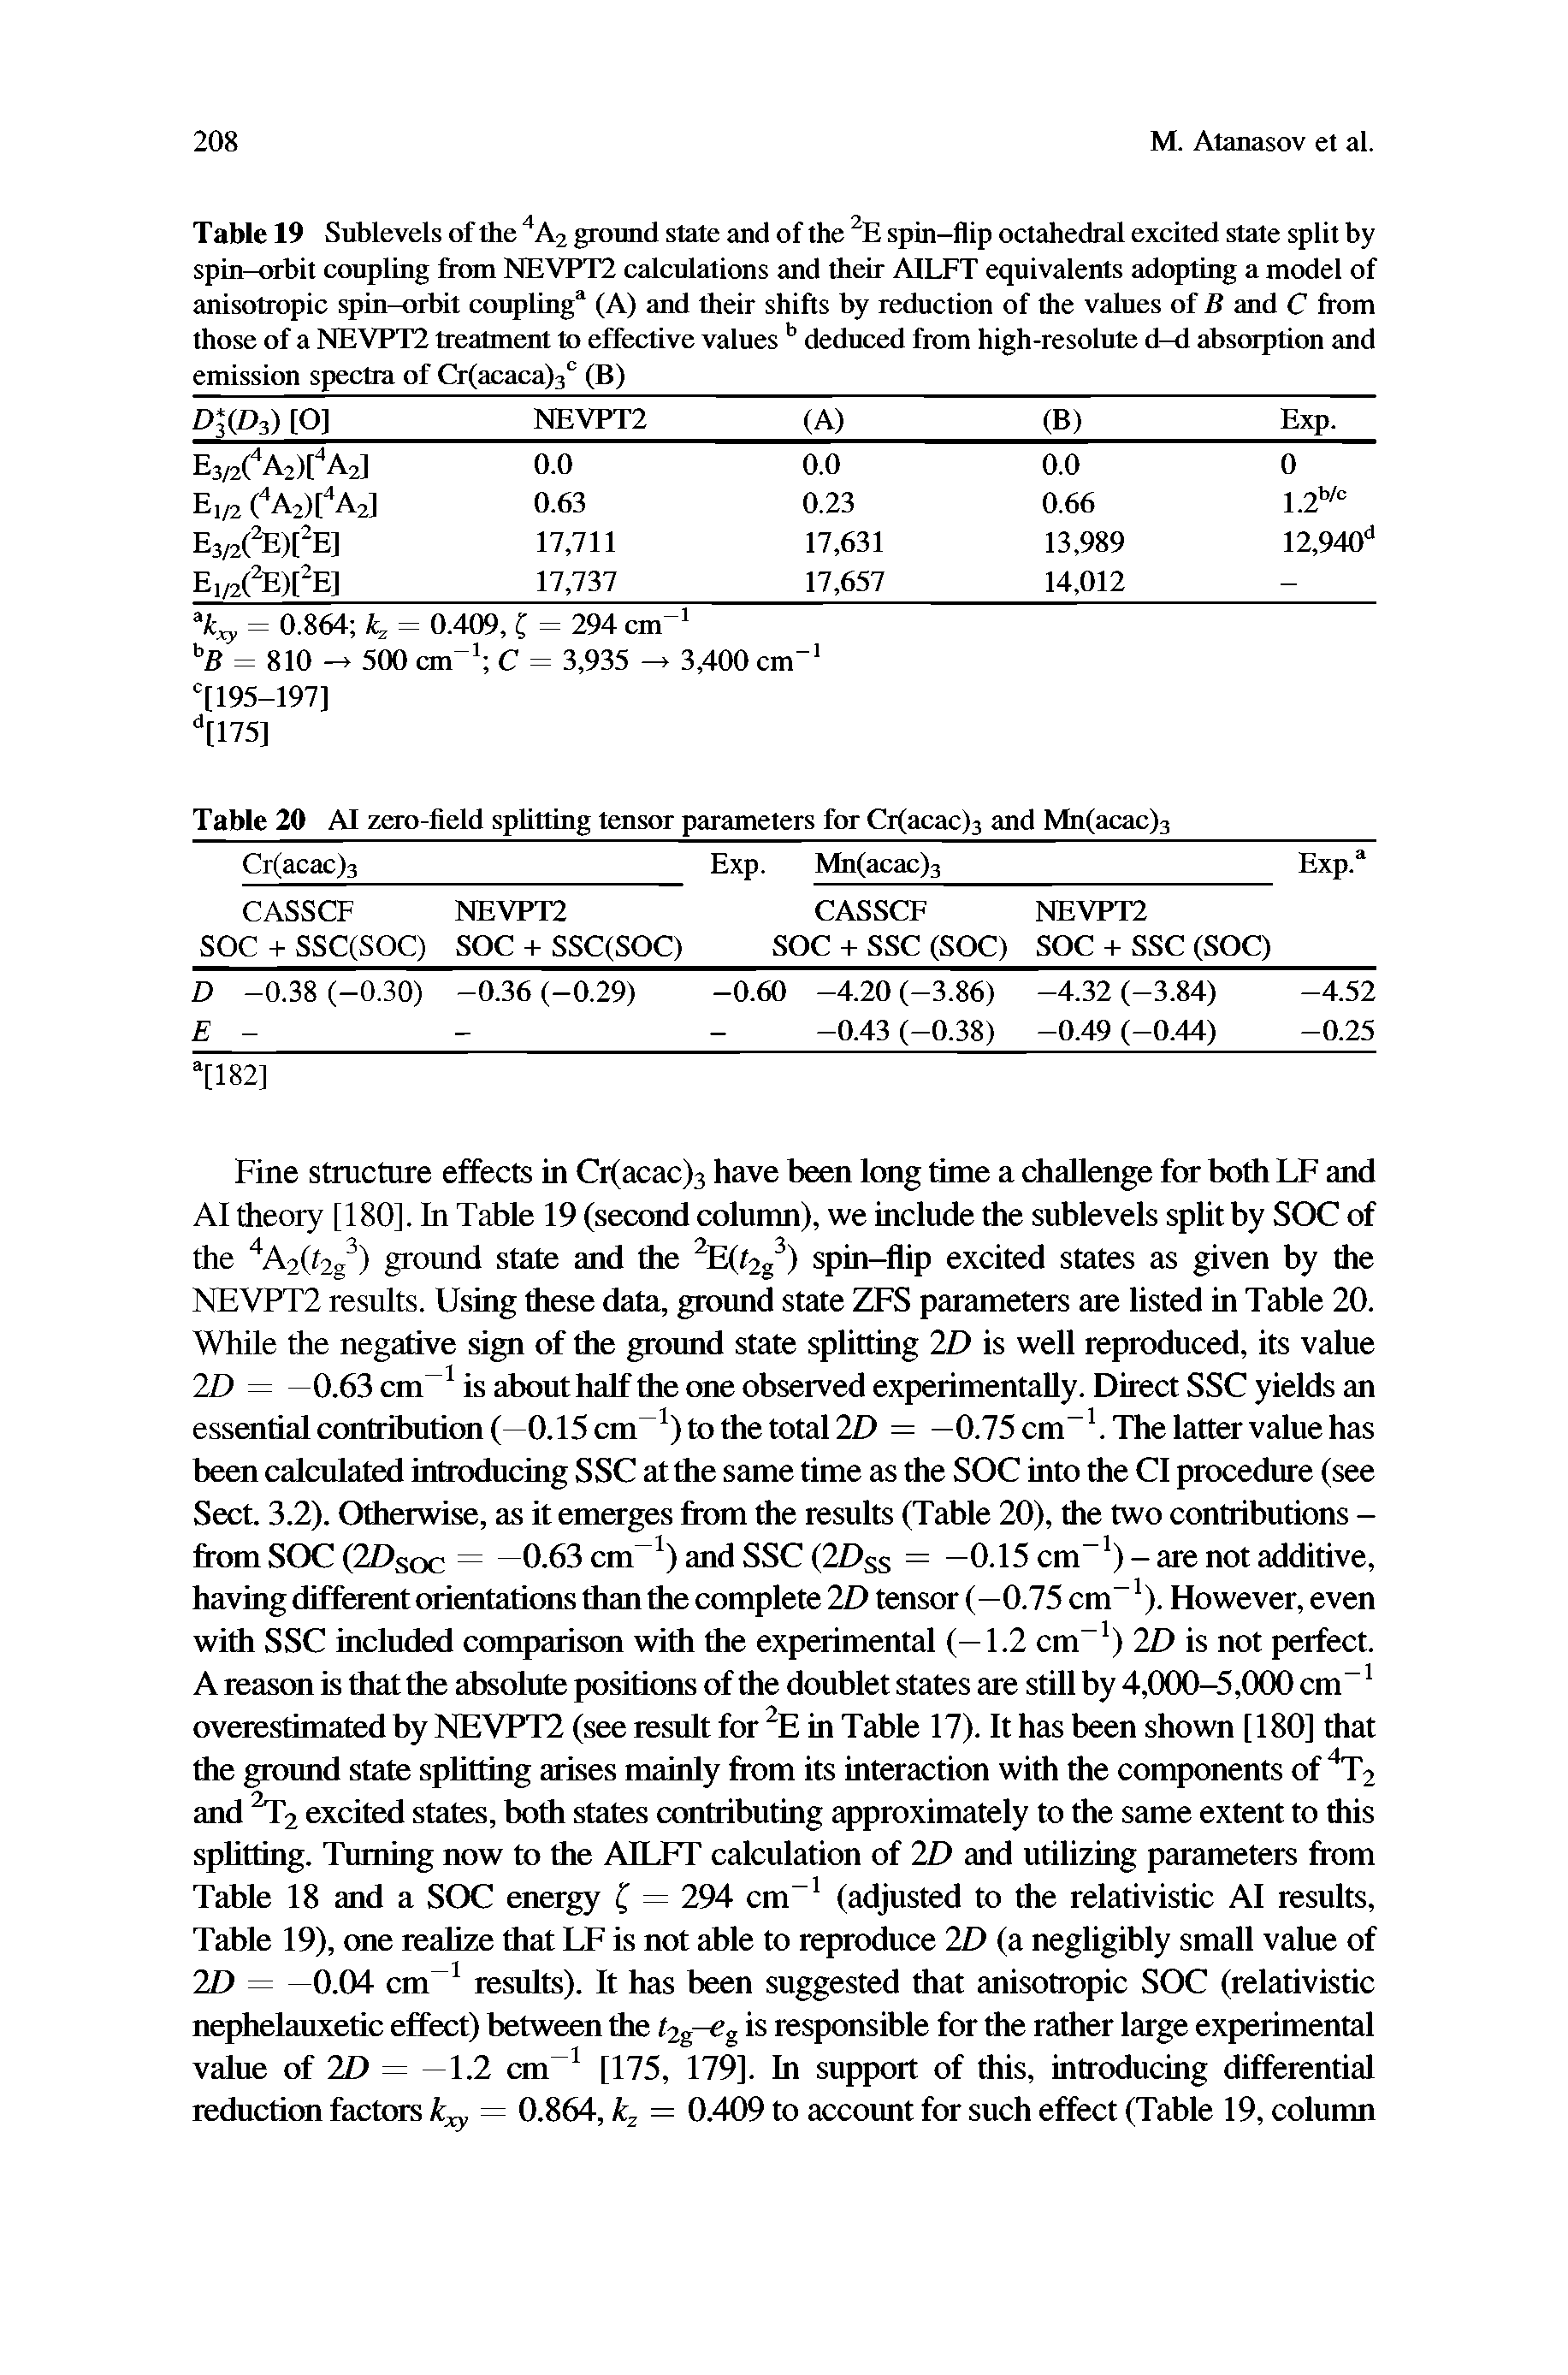 Table 19 Sublevels of the 4A2 ground state and of the 2E spin-flip octahedral excited state split by spin-orbit coupling from NEVPT2 calculations and their AILFT equivalents adopting a model of anisotropic spin-orbit coupling (A) and their shifts by reduction of the values of B and C from those of a NEVPT2 treatment to effective values b deduced from high-resolute d-d absorption and emission spectra of Cr(acaca)3c (B)...